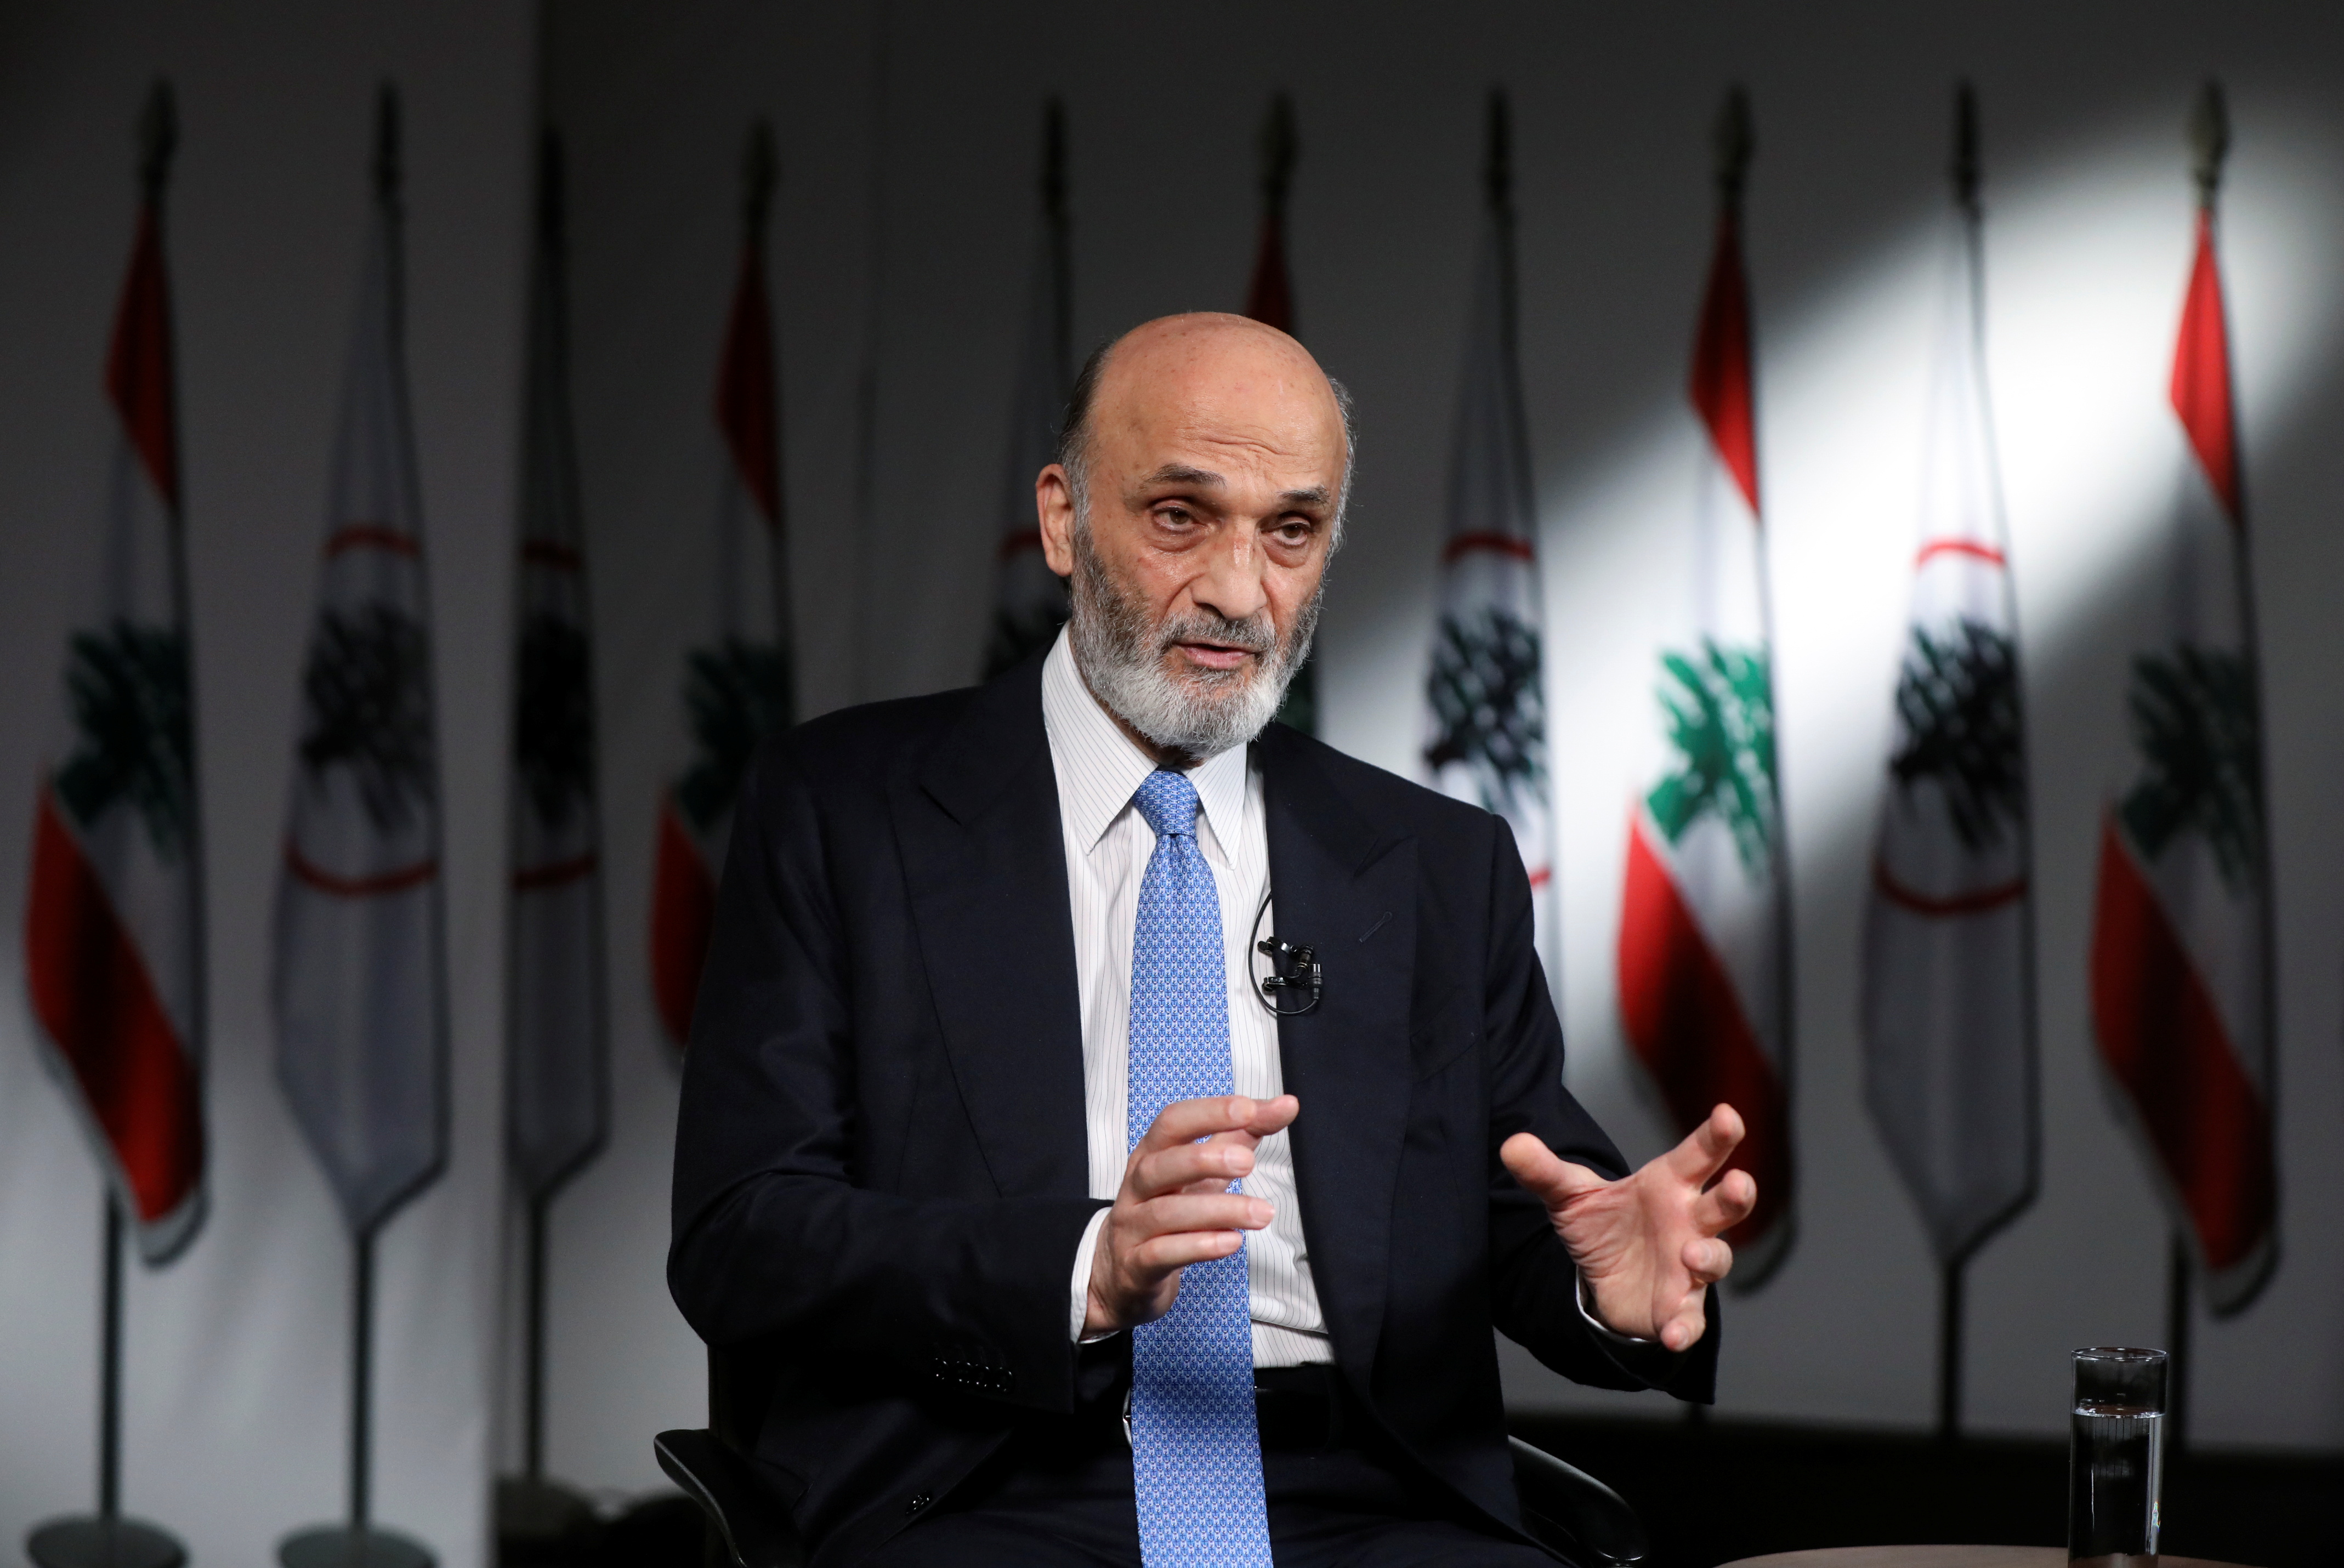 Samir Geagea, the leader of Lebanon's Christian Lebanese Forces party, speaks during an interview with Reuters at his residence in Maarab